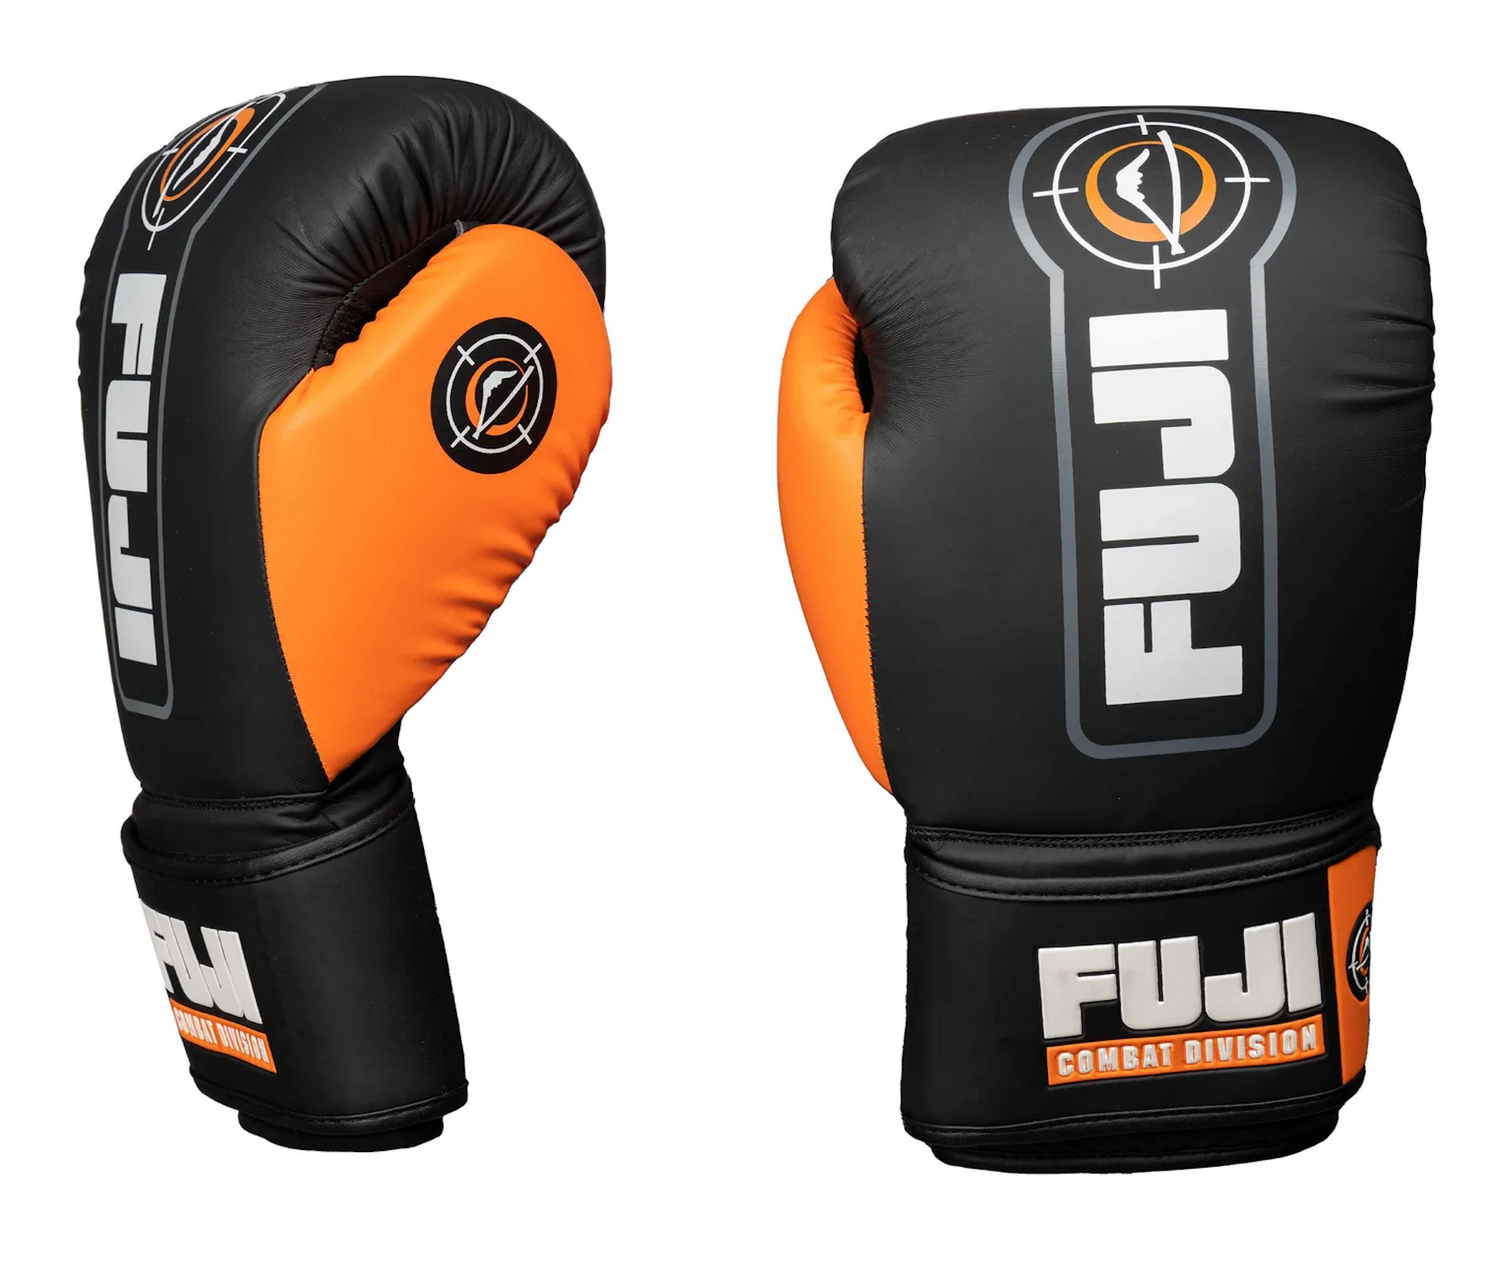 Precision Boxing Gloves by Fuji